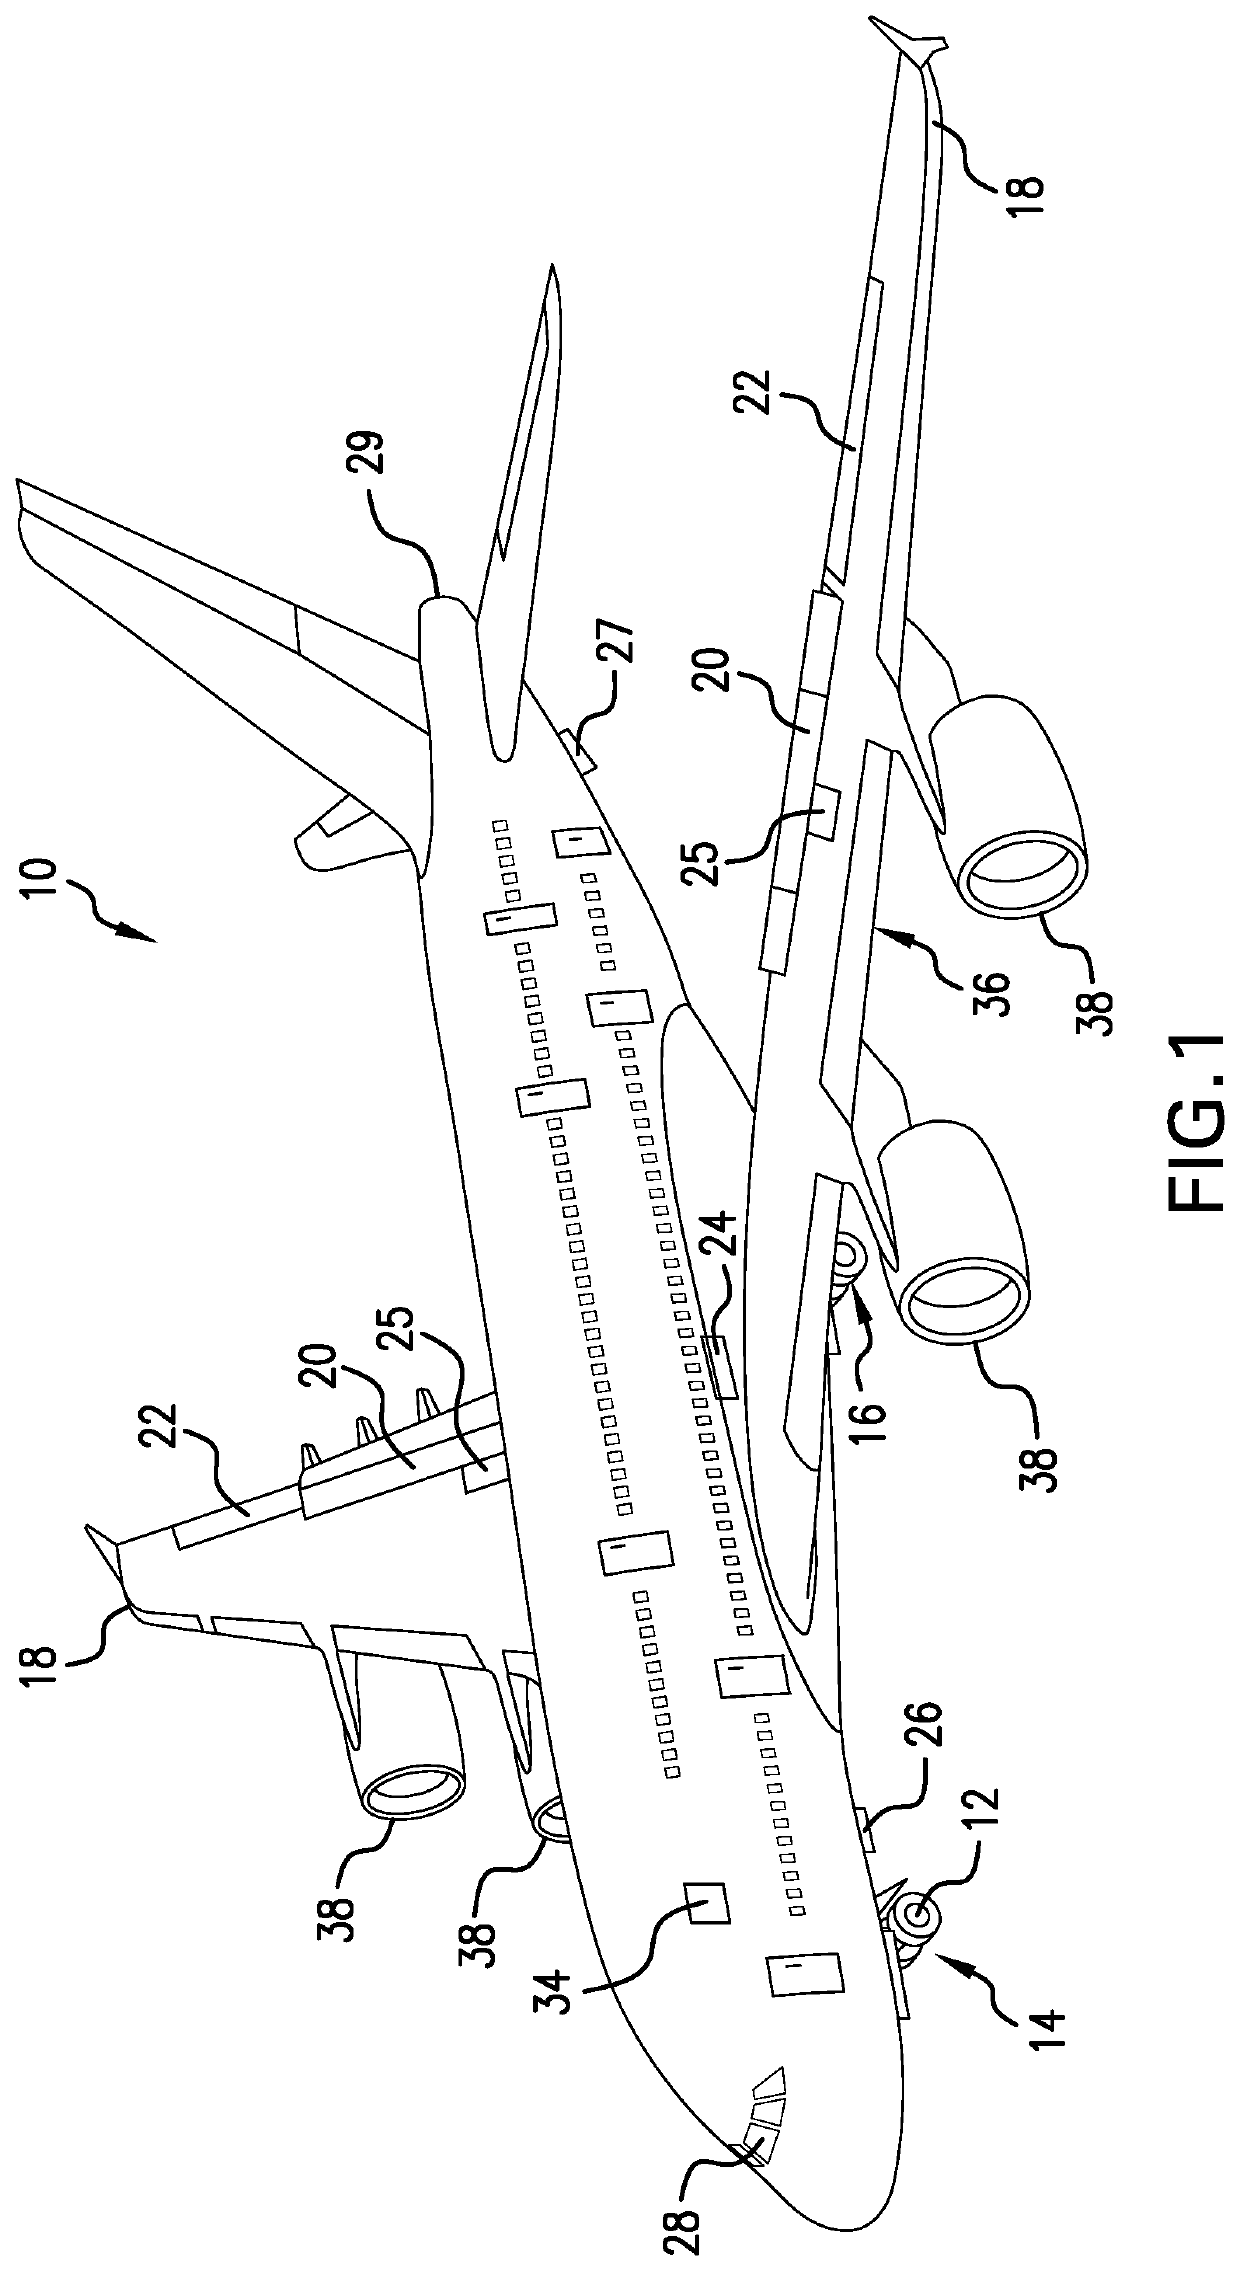 System and method for determining aircraft safe taxi, takeoff, and flight readiness